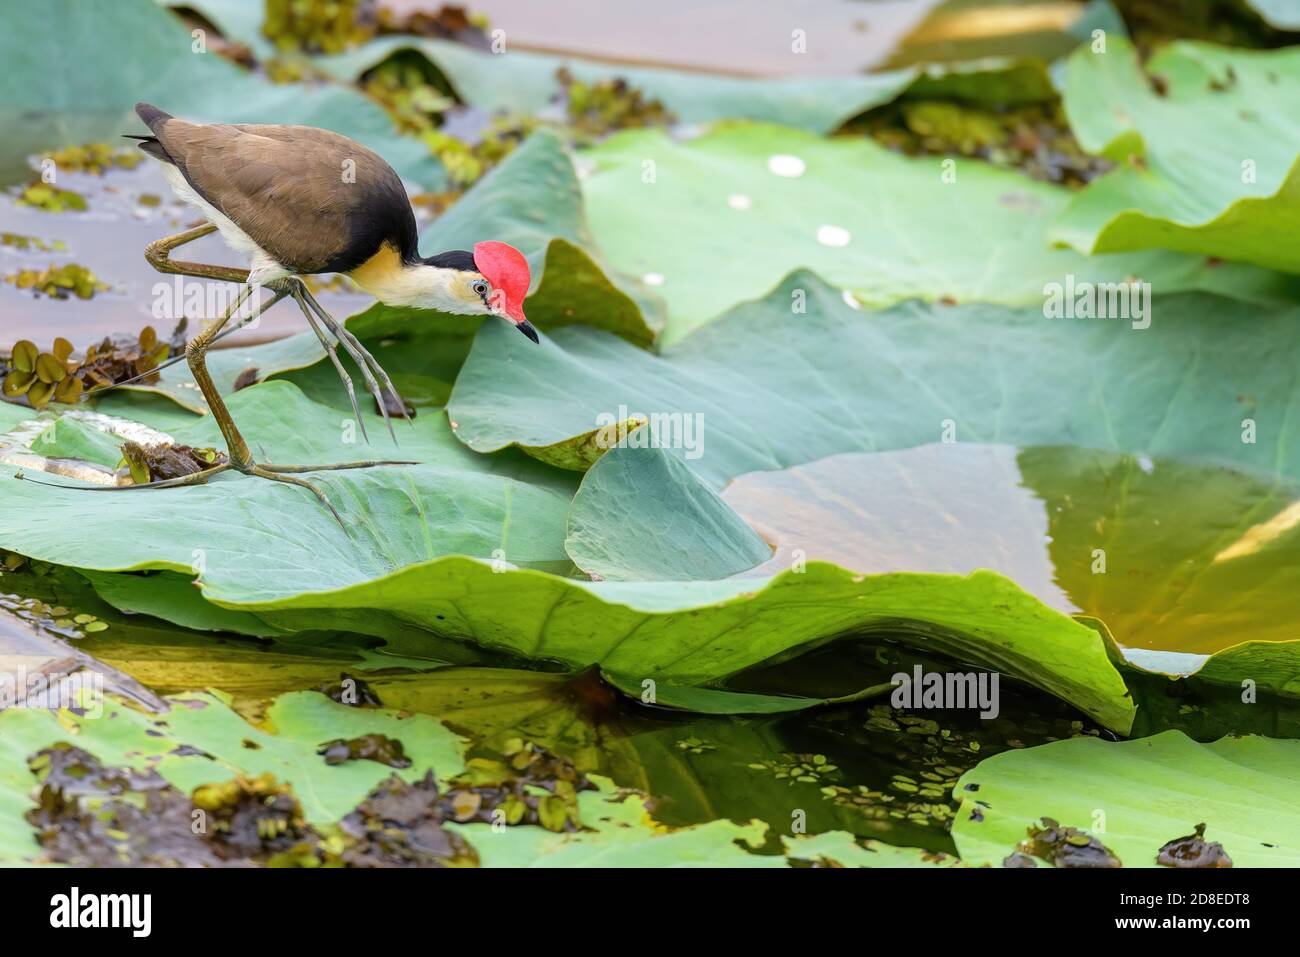 A comb crested jacana (Irediparra gallinacea), also known as the lotusbird or lilytrotter, Northern Territory, Australia Stock Photo